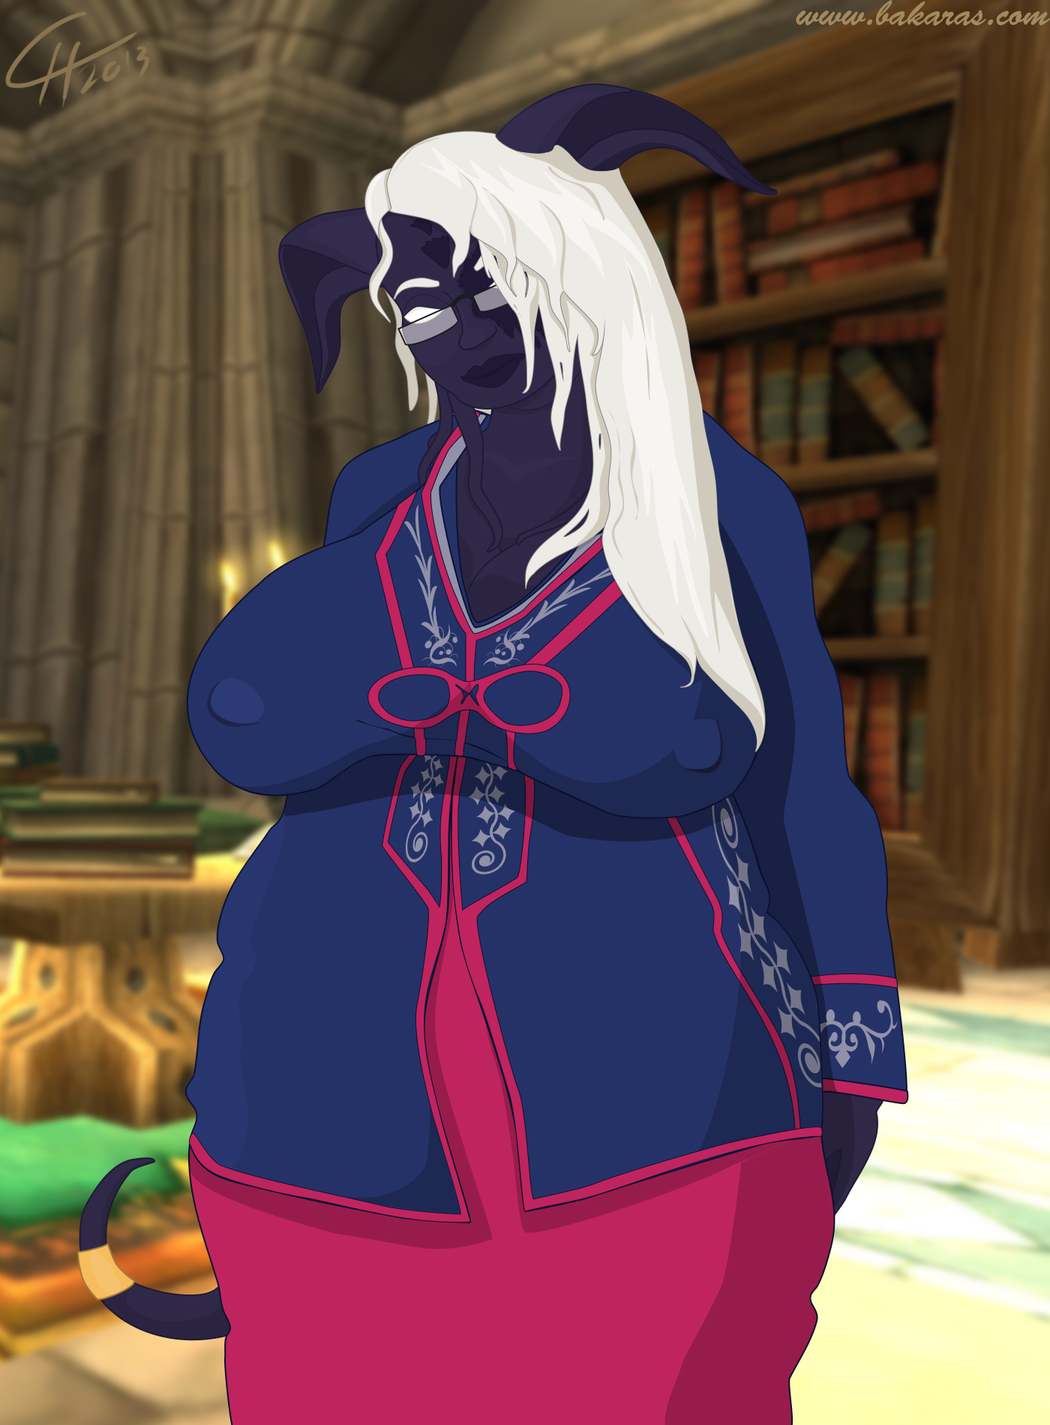 Ms. Traveling-Librarian [Draenei/BBW/Tease]
Ms. Selanaar Tallulah pre-Cataclysm at Stormwind Library.
Also new try on style and colours. 2013.
Keywords: Draenei;OC;Tease;BBW